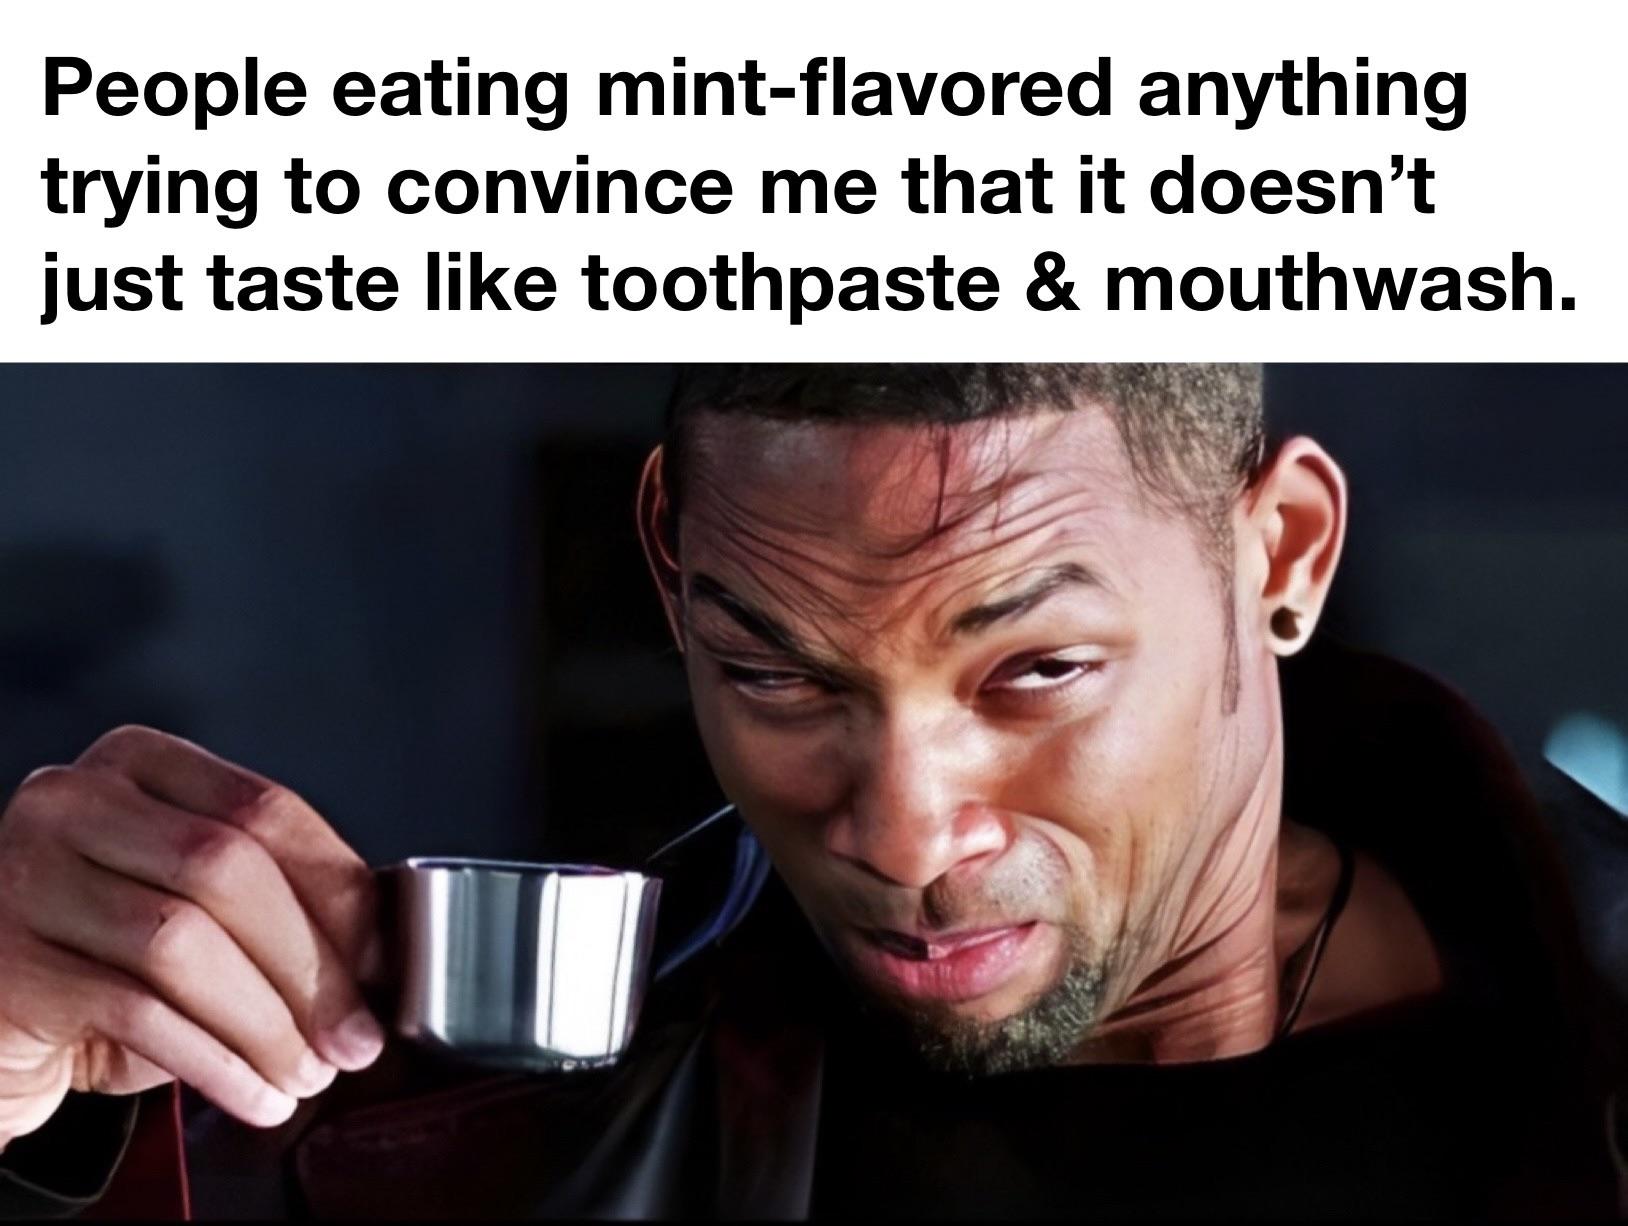 dank memes - Food - People eating mintflavored anything trying to convince me that it doesn't just taste toothpaste & mouthwash.